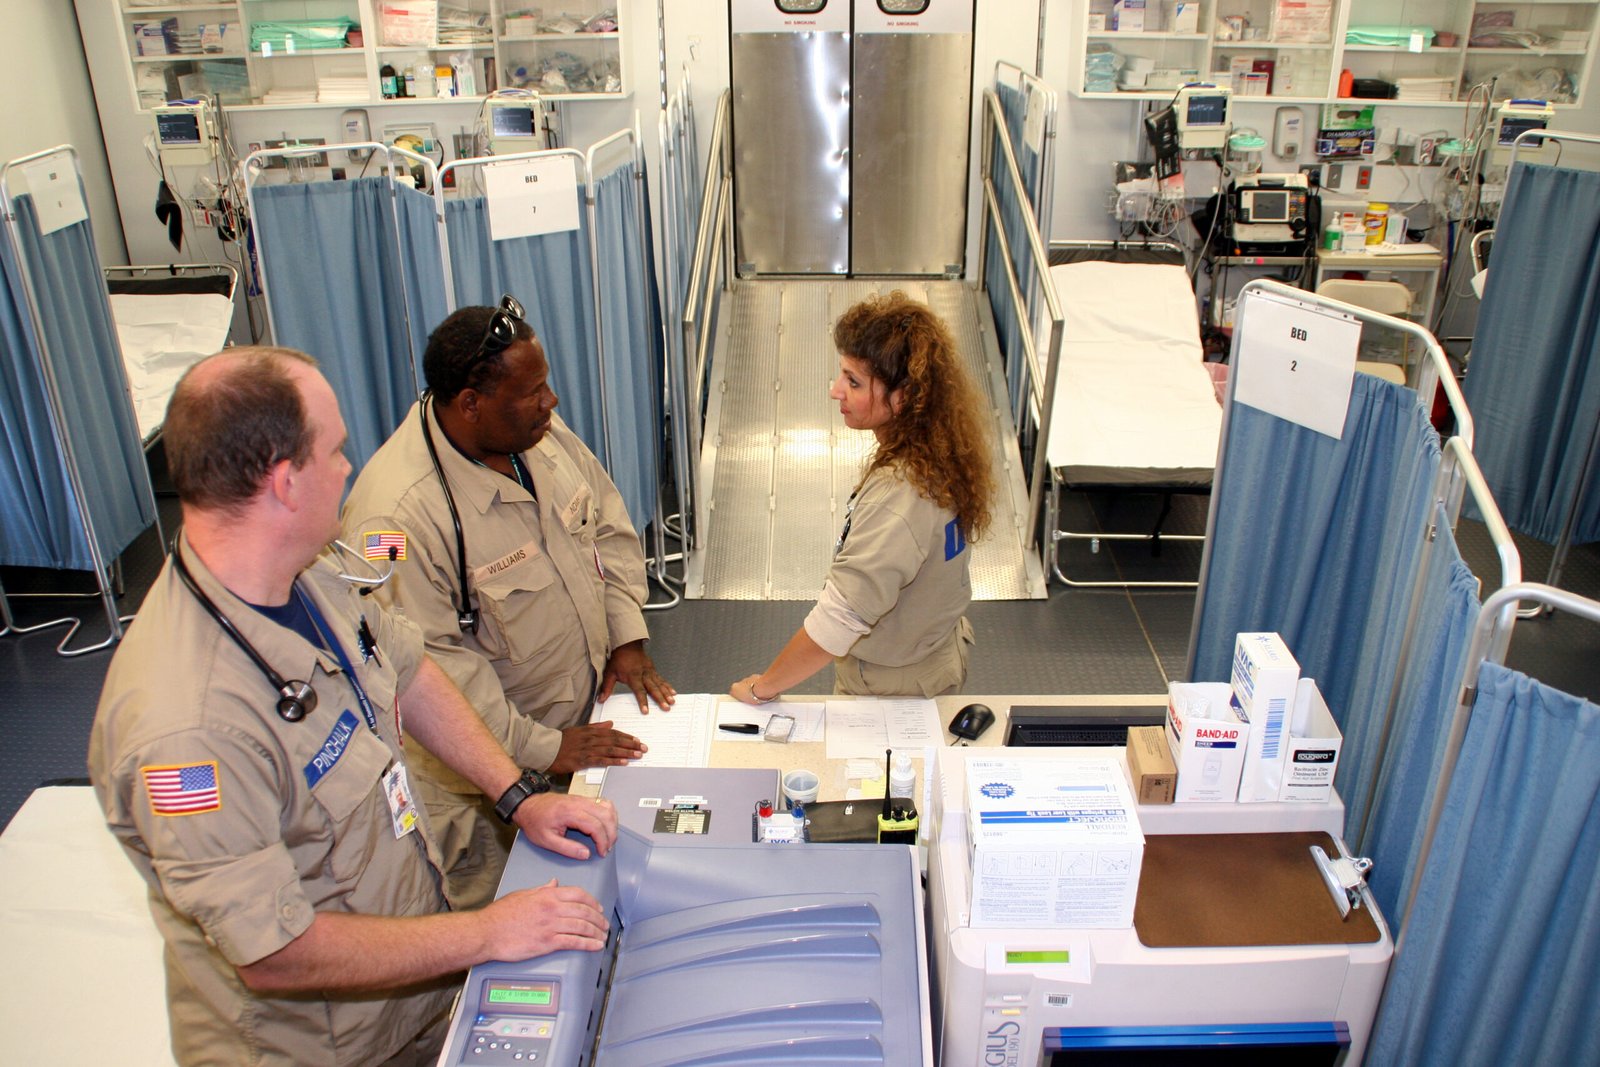 The Role of Emergency Departments in Hospitals